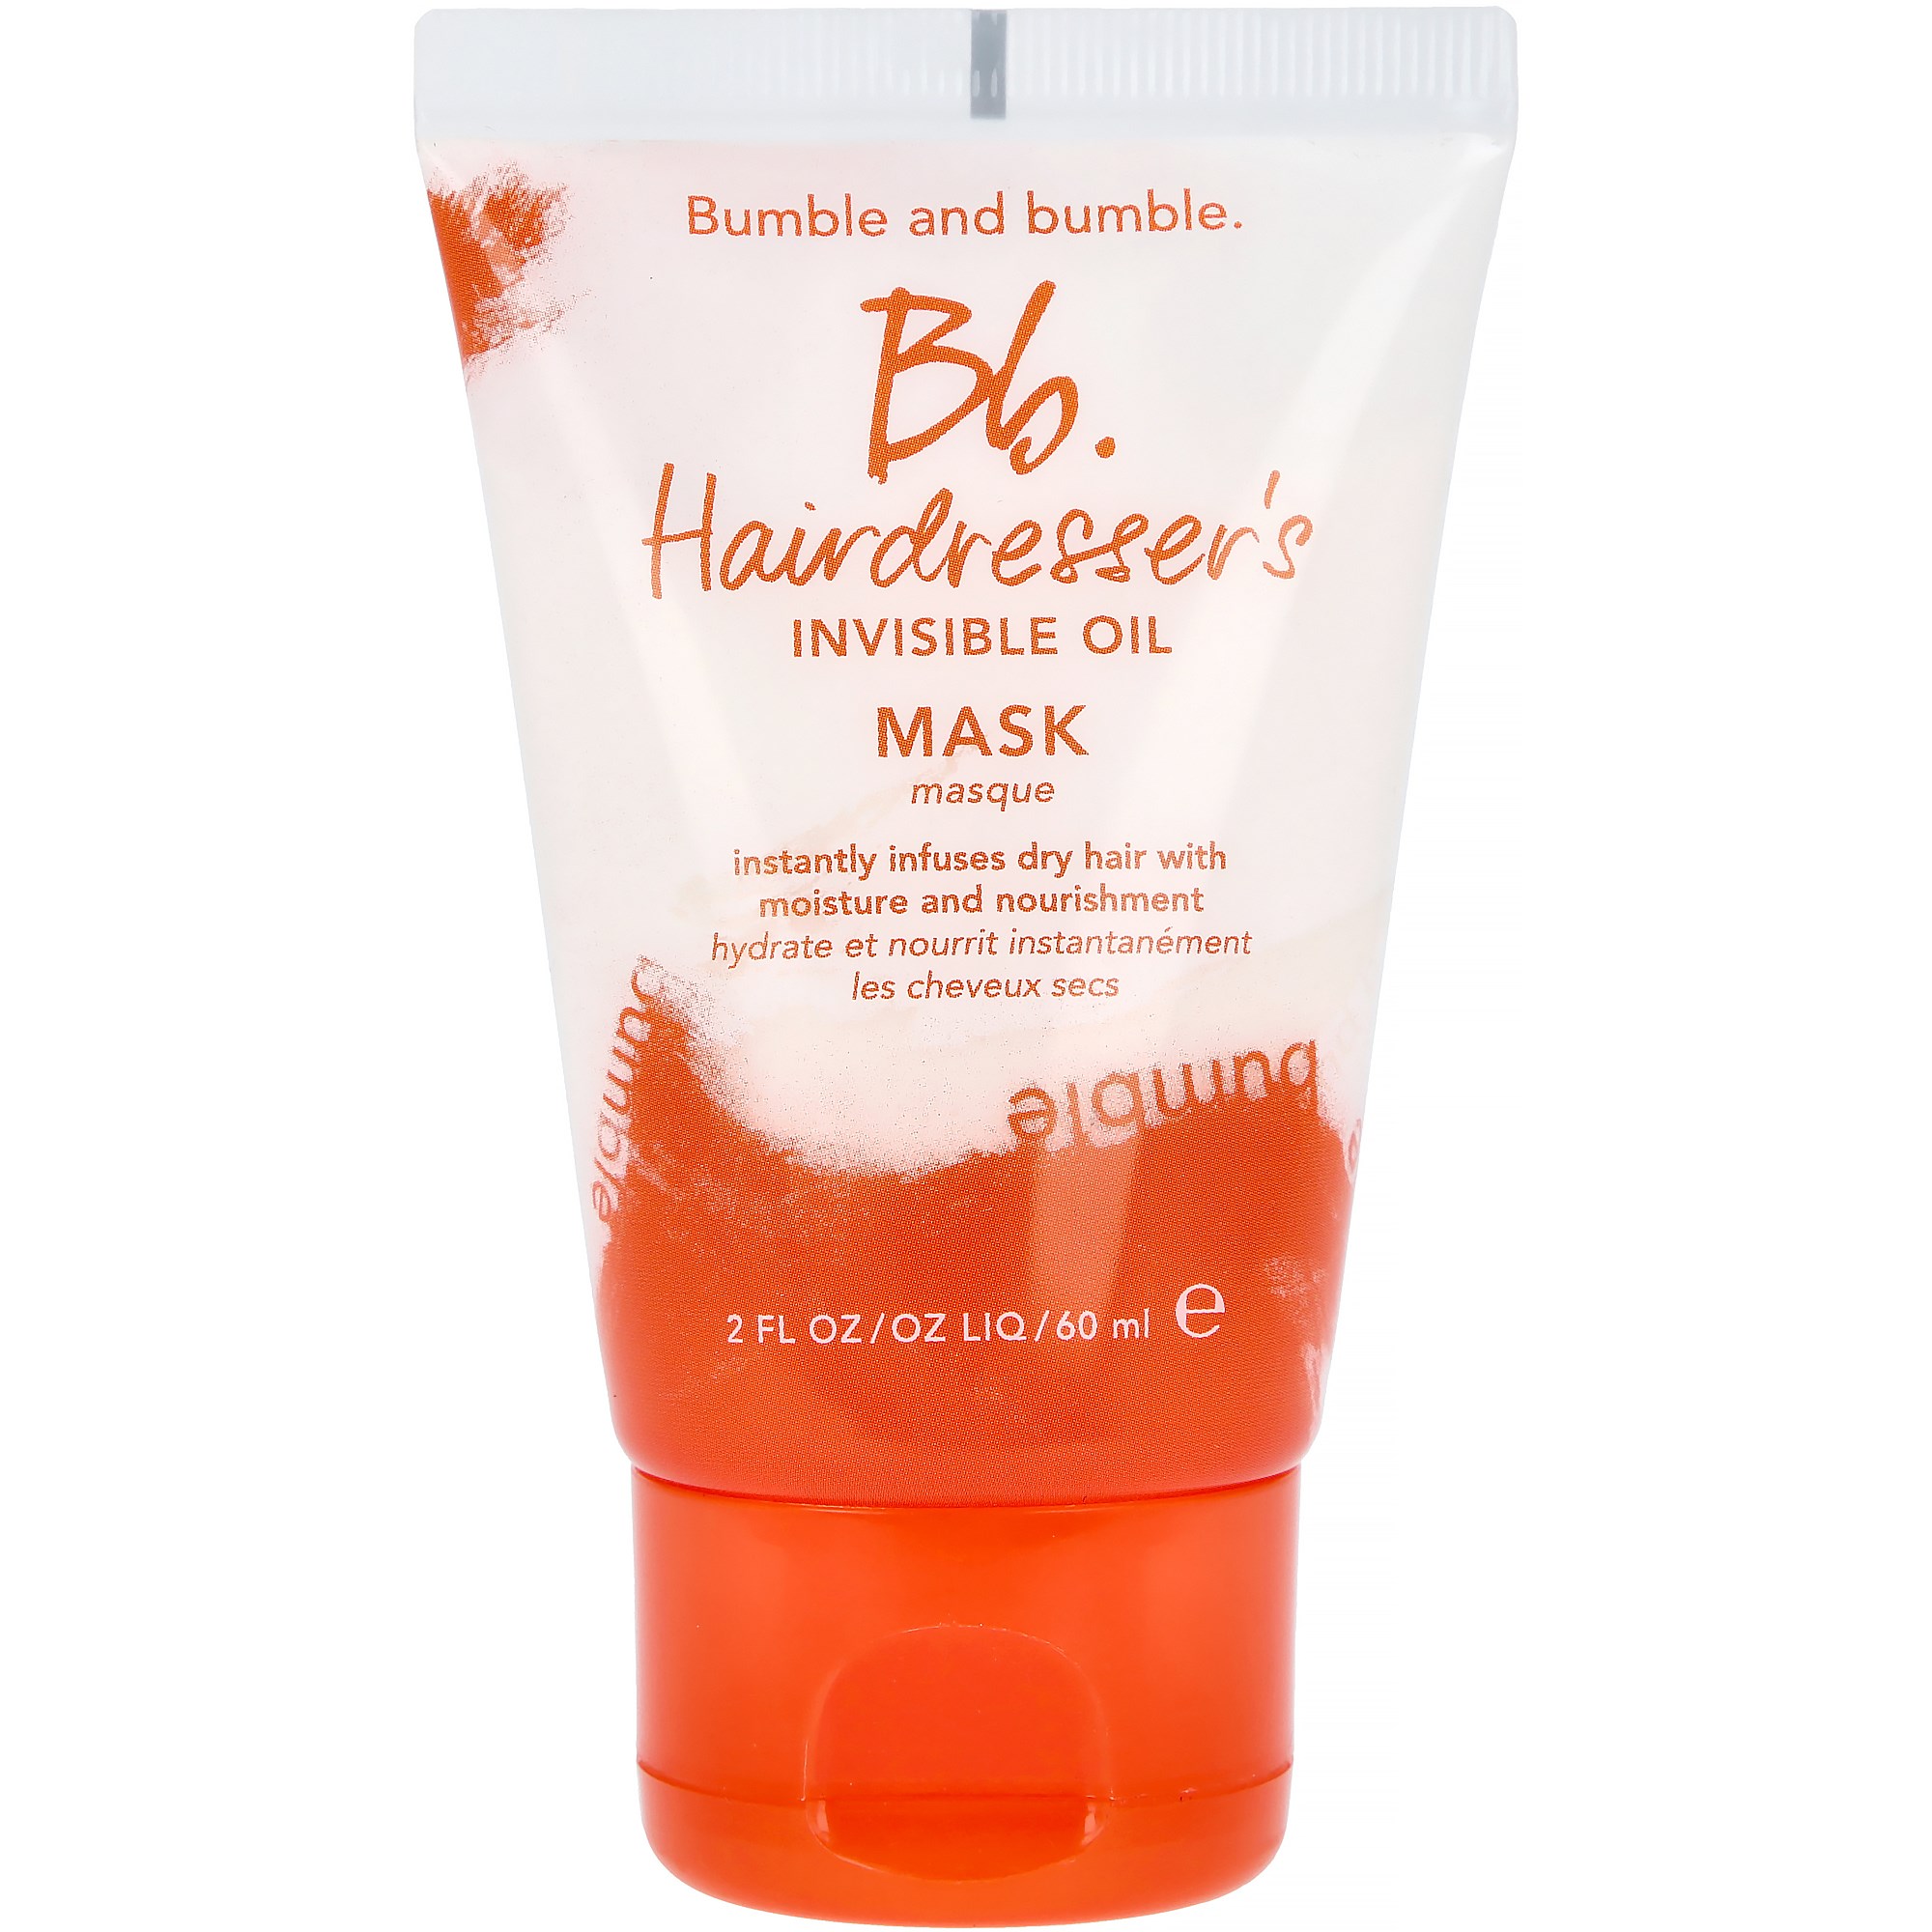 Läs mer om Bumble and bumble Hairdressers Mask